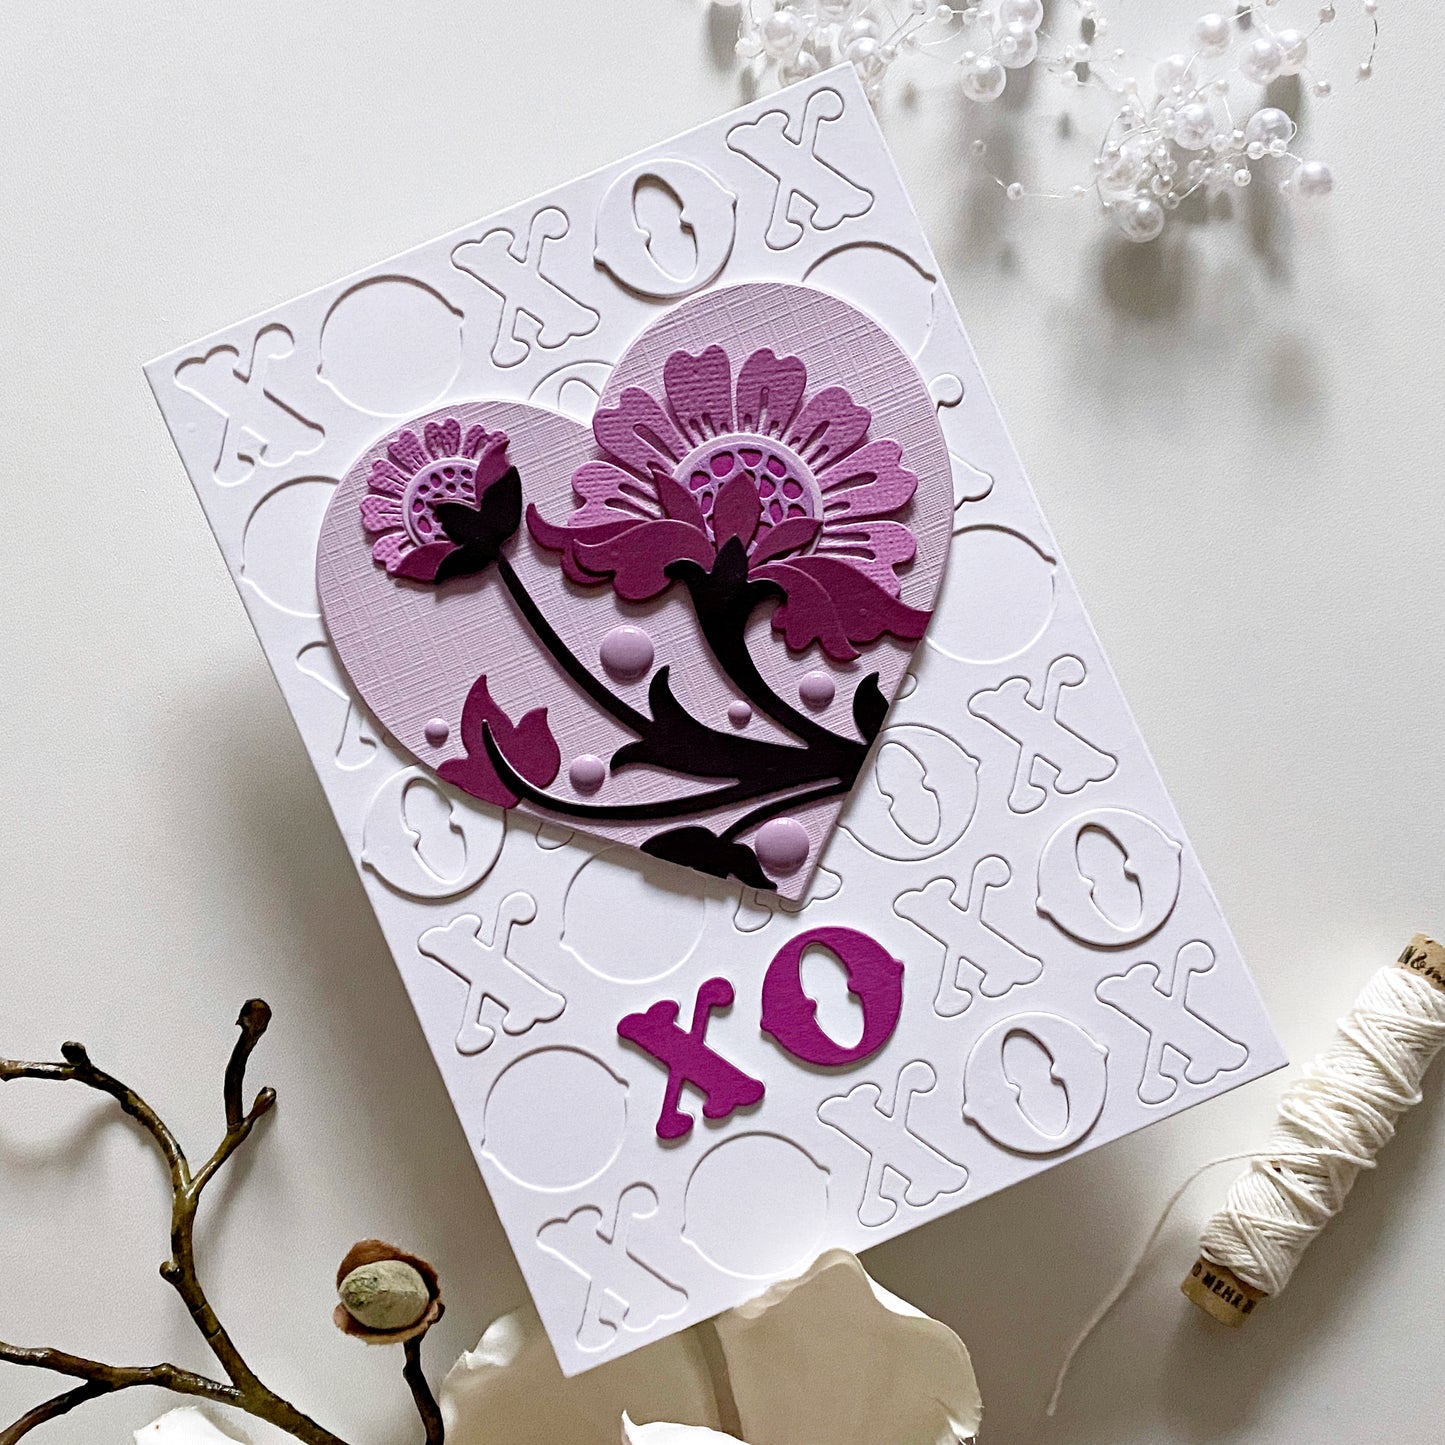 XOXO Background 5x7" Cover Plate by Paige Taylor Evans